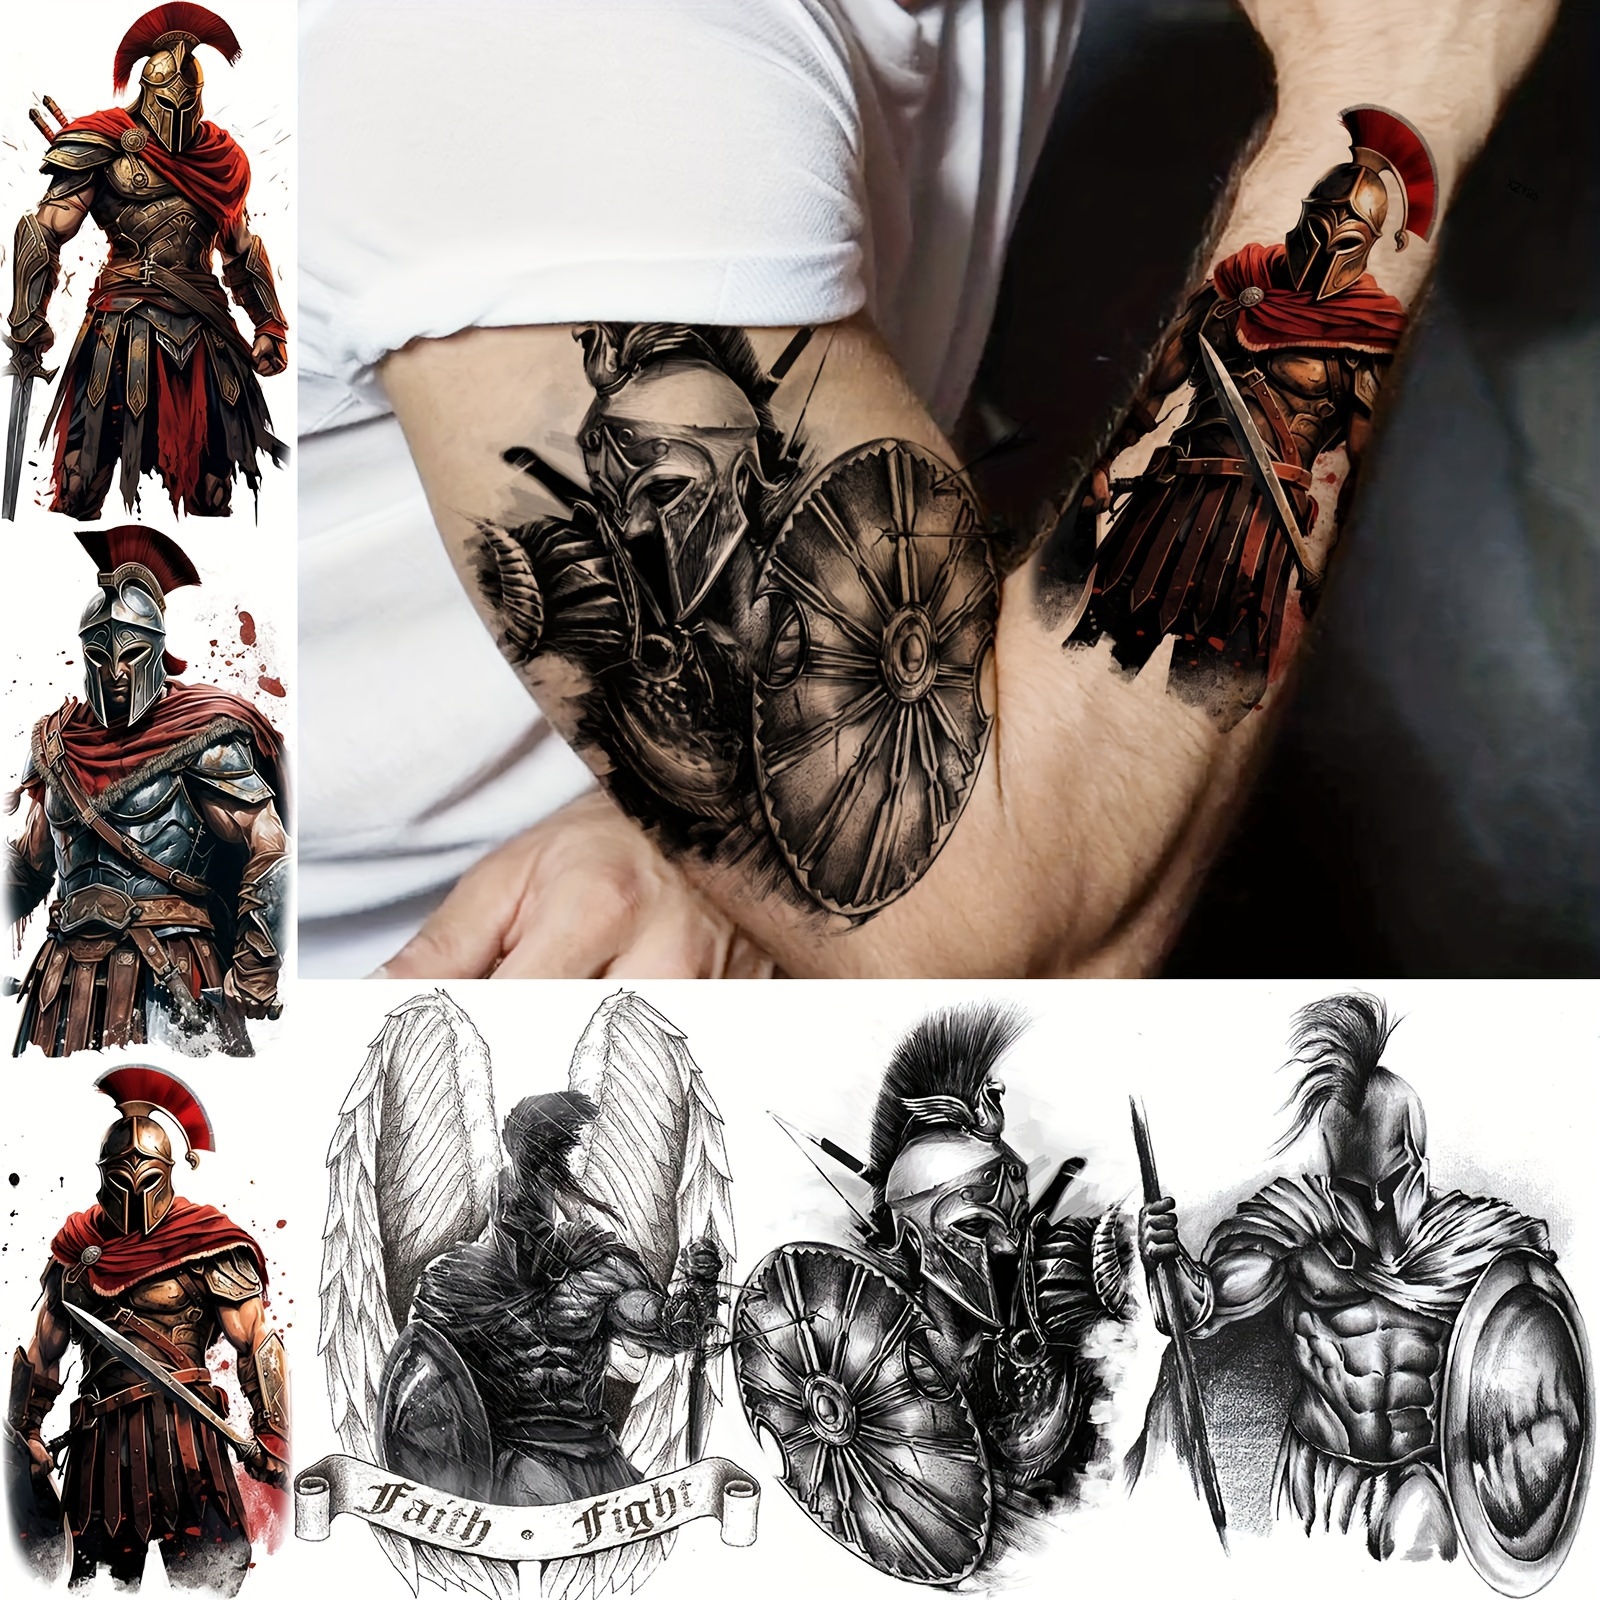 

6-pack Large Spartan Warrior Temporary Tattoos - Realistic Knight Hero Designs For Men & Women, Waterproof Body Art Stickers For Arms, Shoulders & More